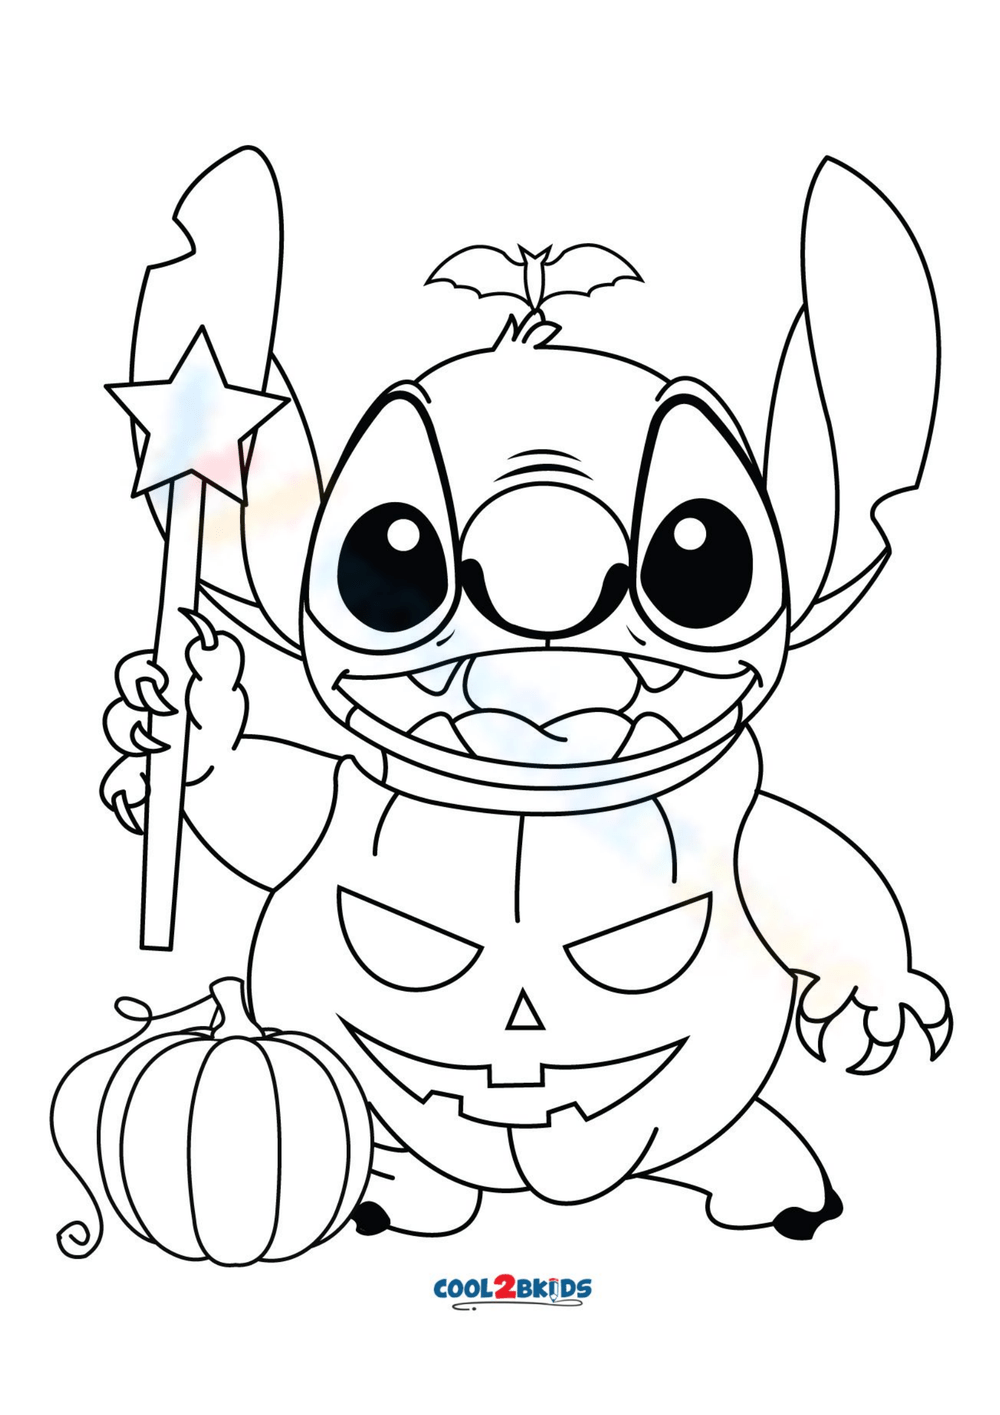 Printable Disney Halloween Coloring Pages For All Ages